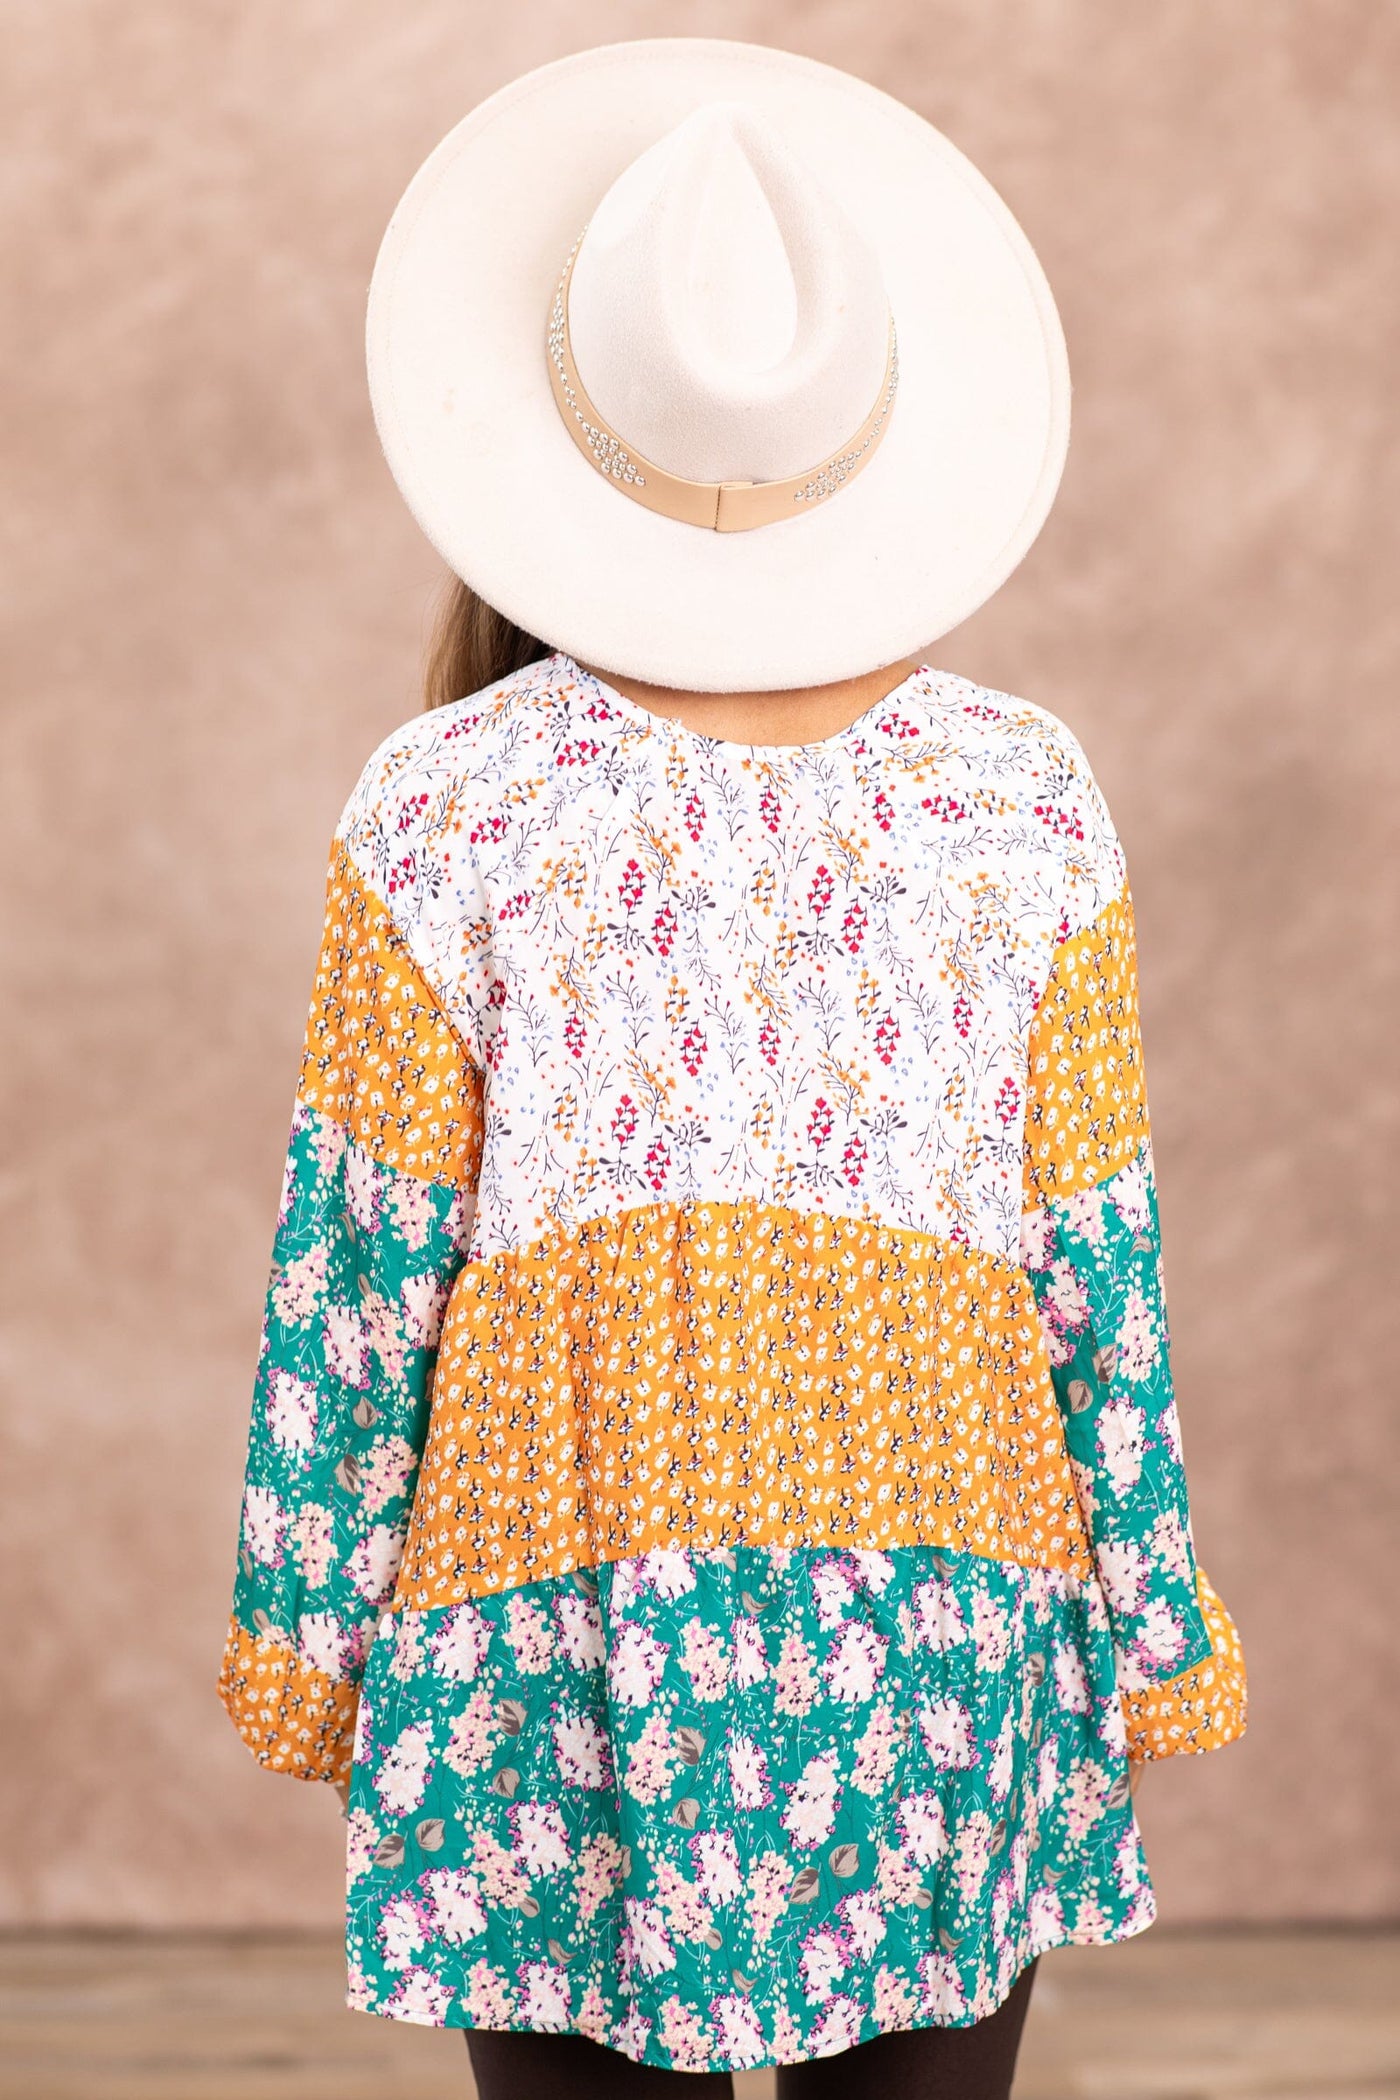 Jade and Cinnamon Floral Print Top - Filly Flair